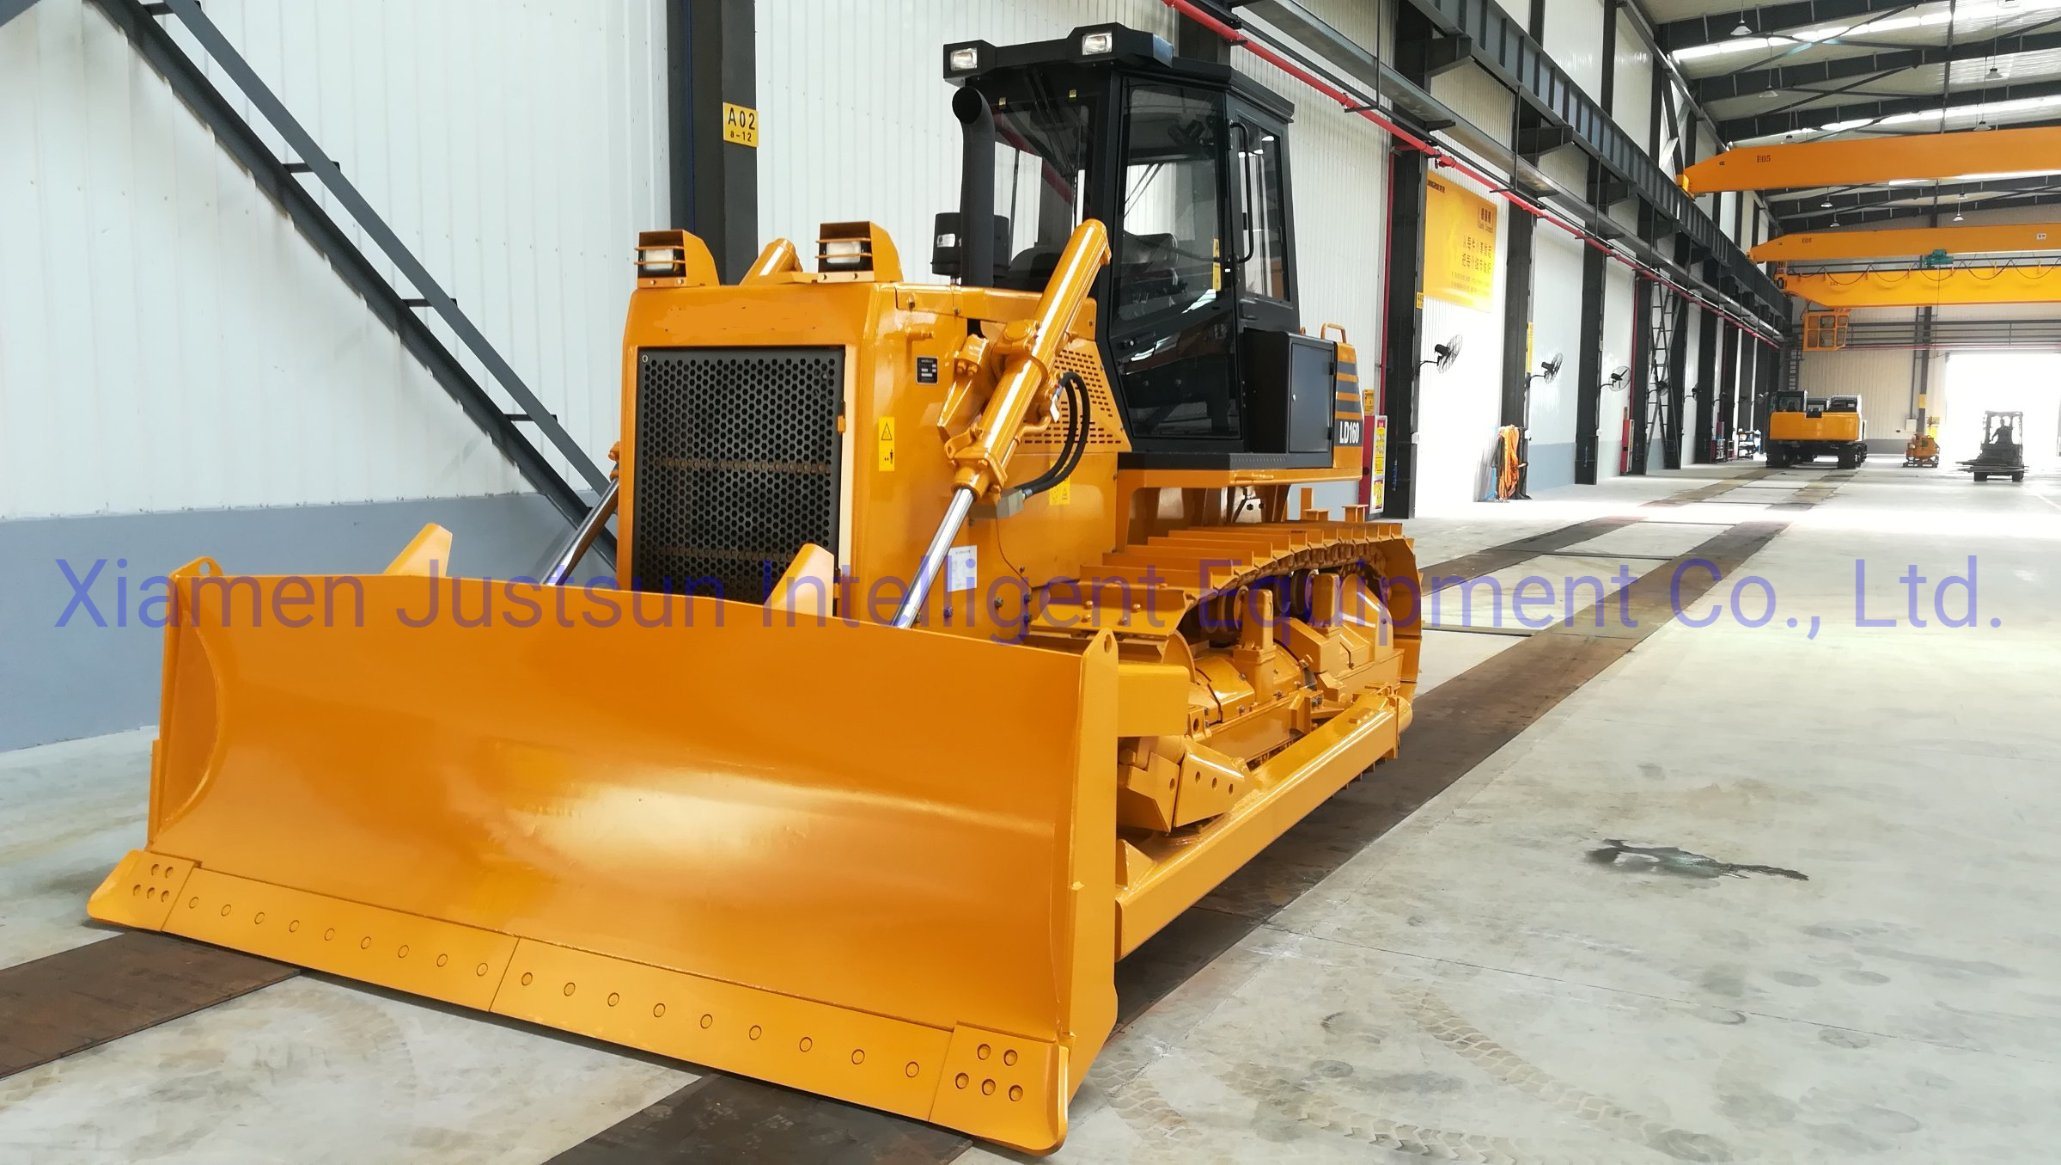 Standard Crawler Bulldozer with Excellent Performance